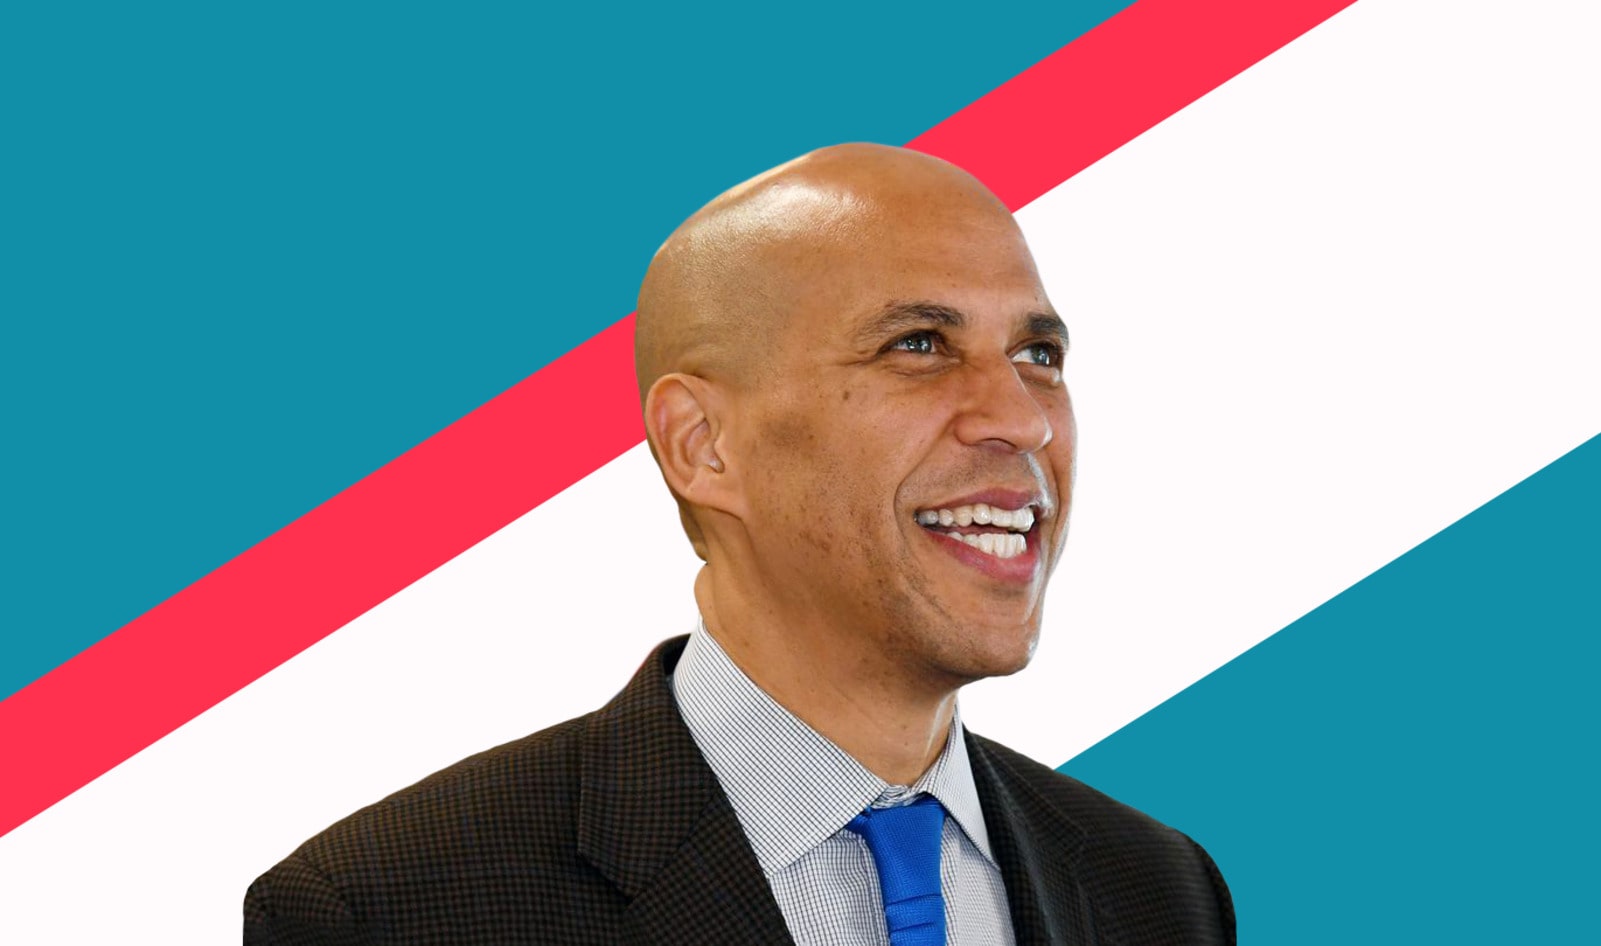 Cory Booker on Animal Rights, Veganism, and How to Change the World